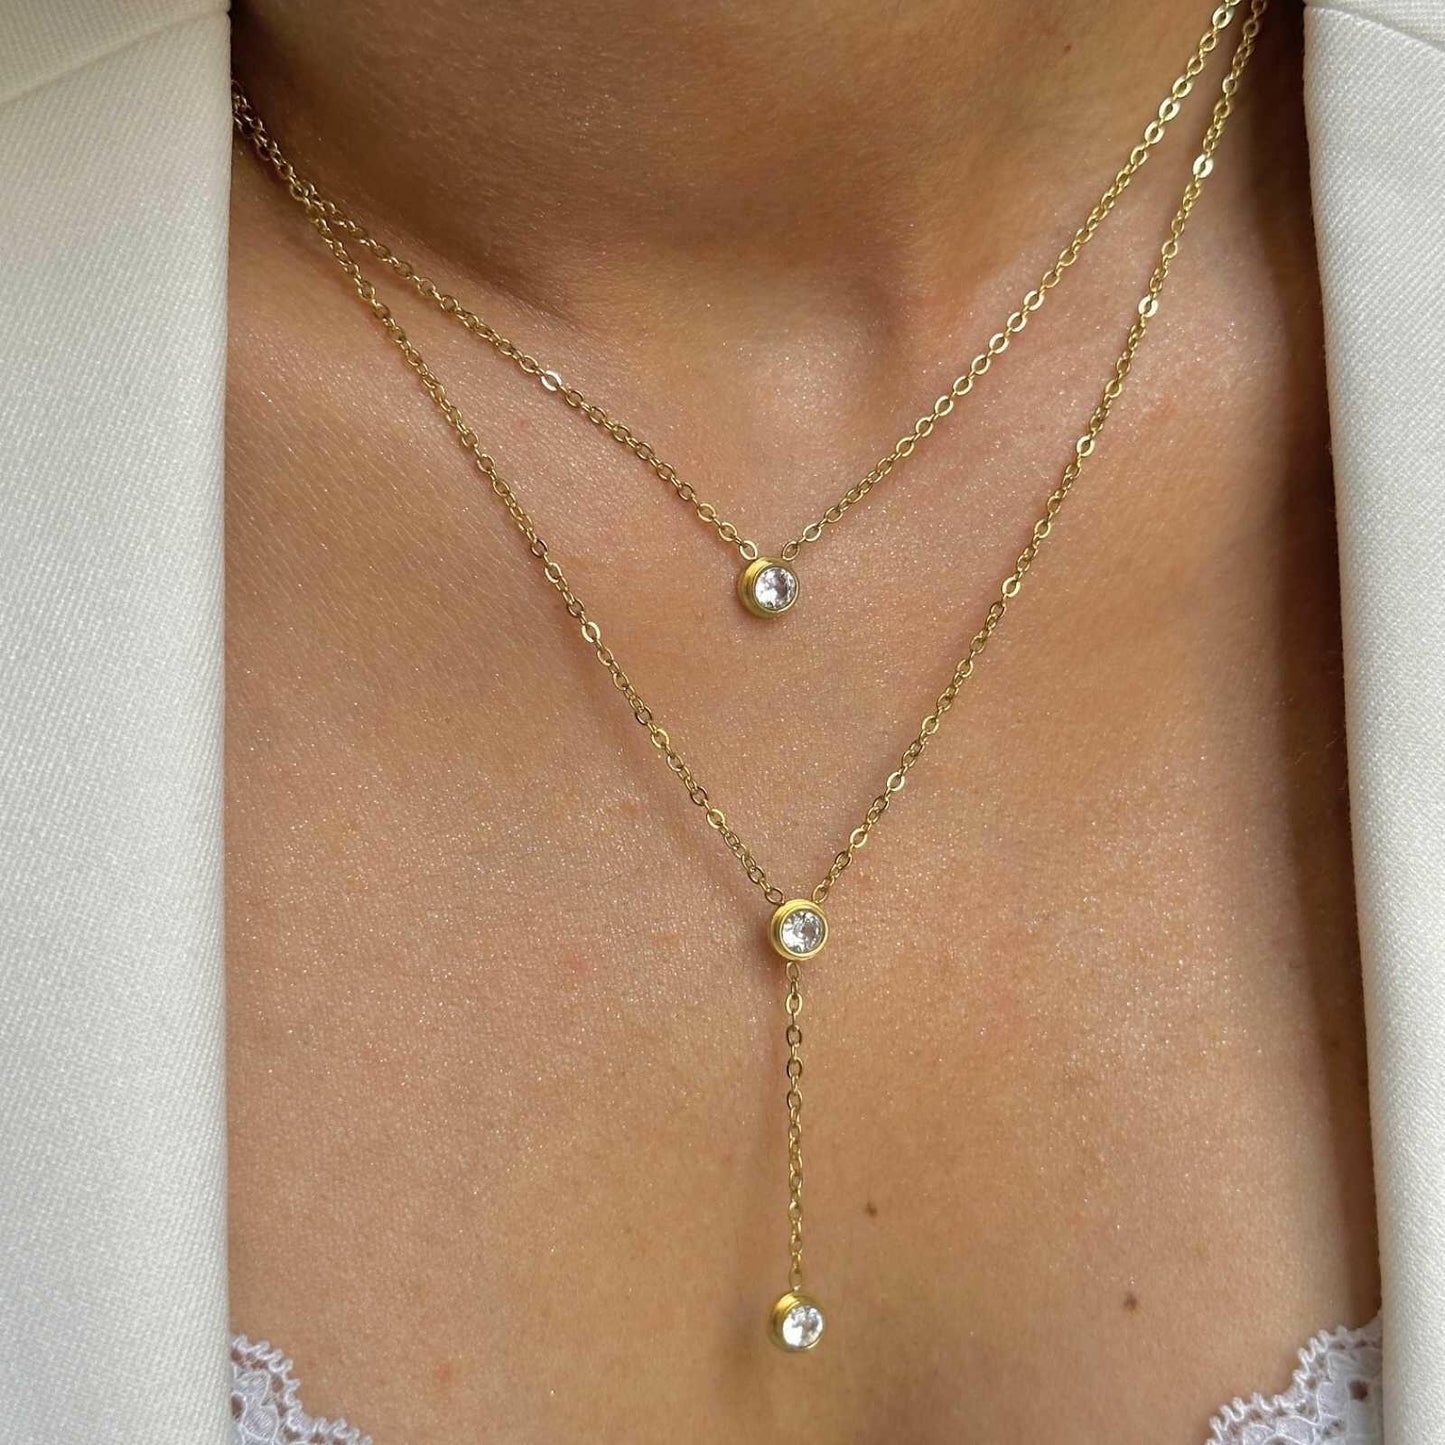 Layered Drops Necklace  The Chic Women.